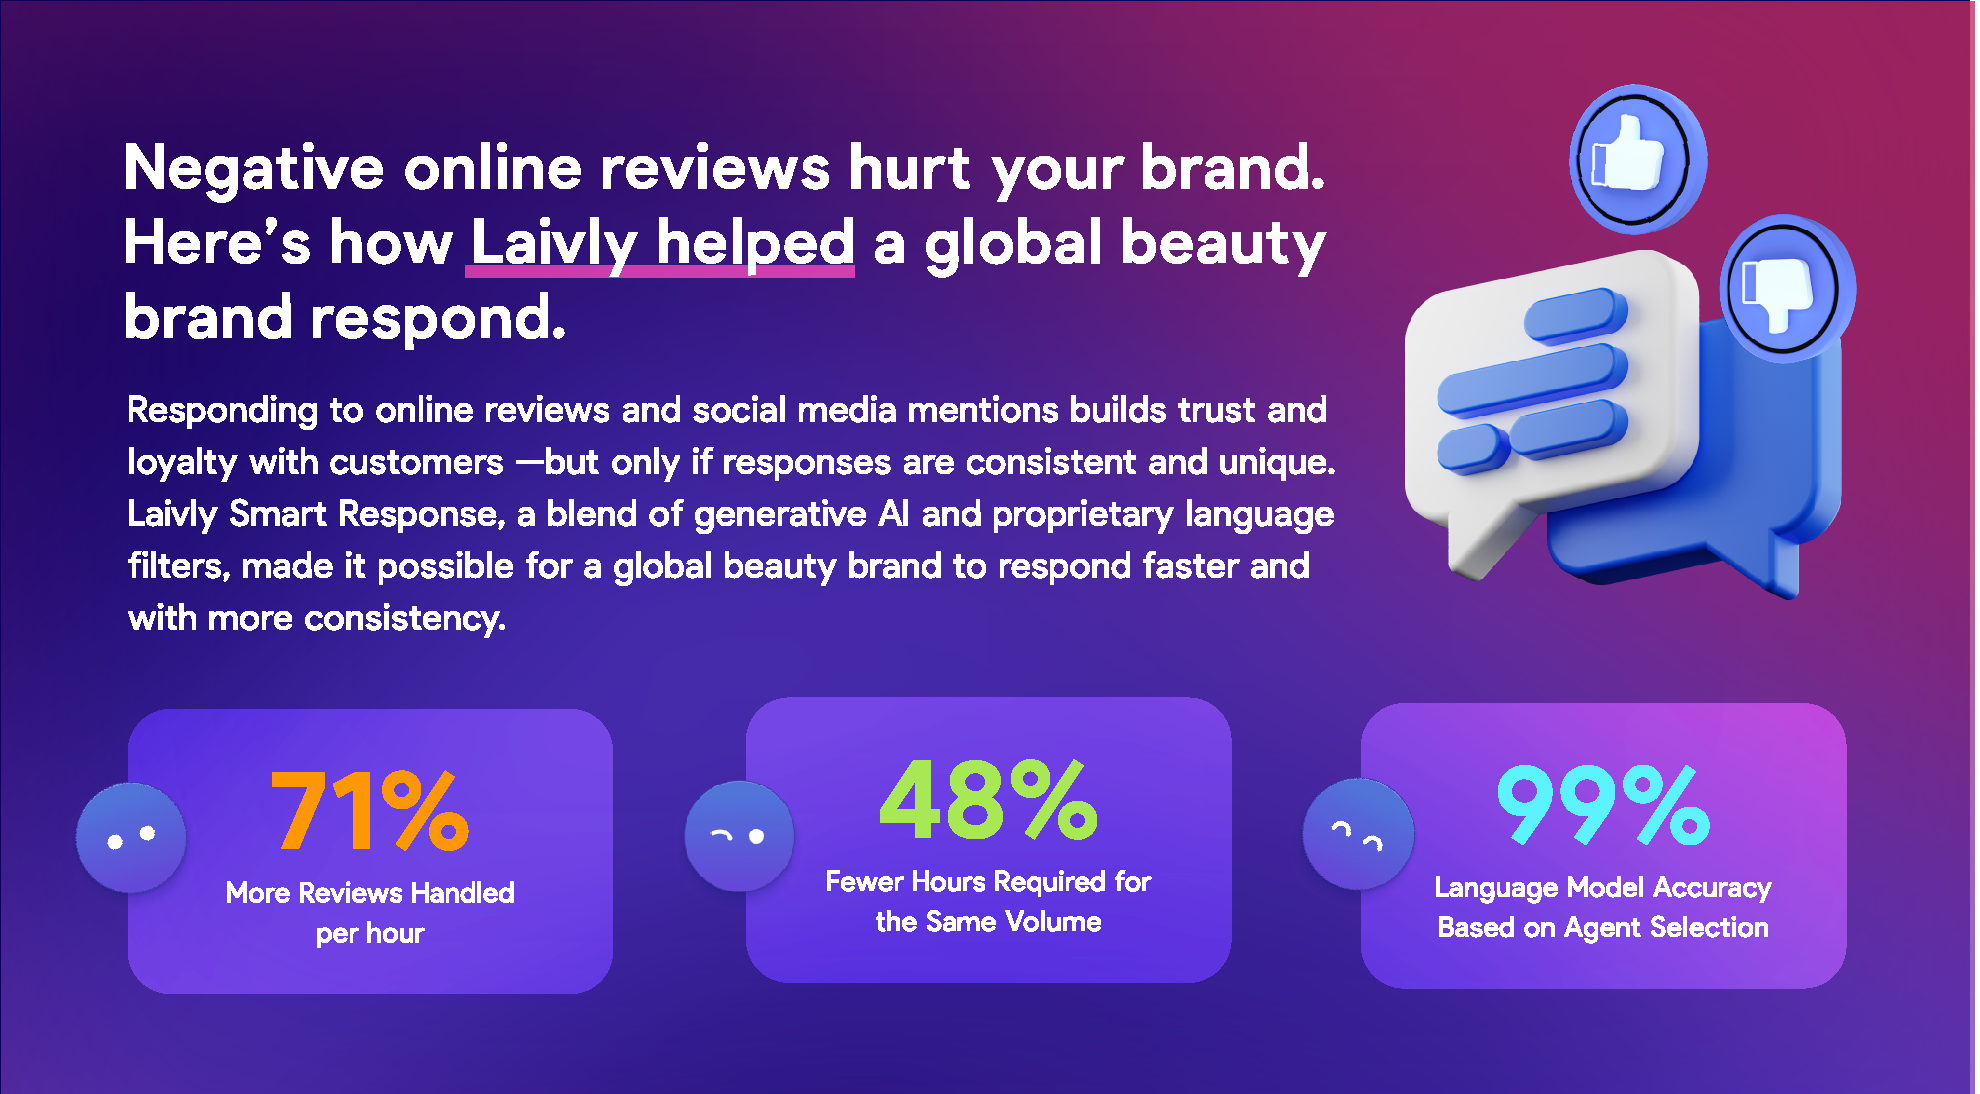 Negatine Online reviews hurt your brand. Here is how Laivly helped a global beauty brand respond.